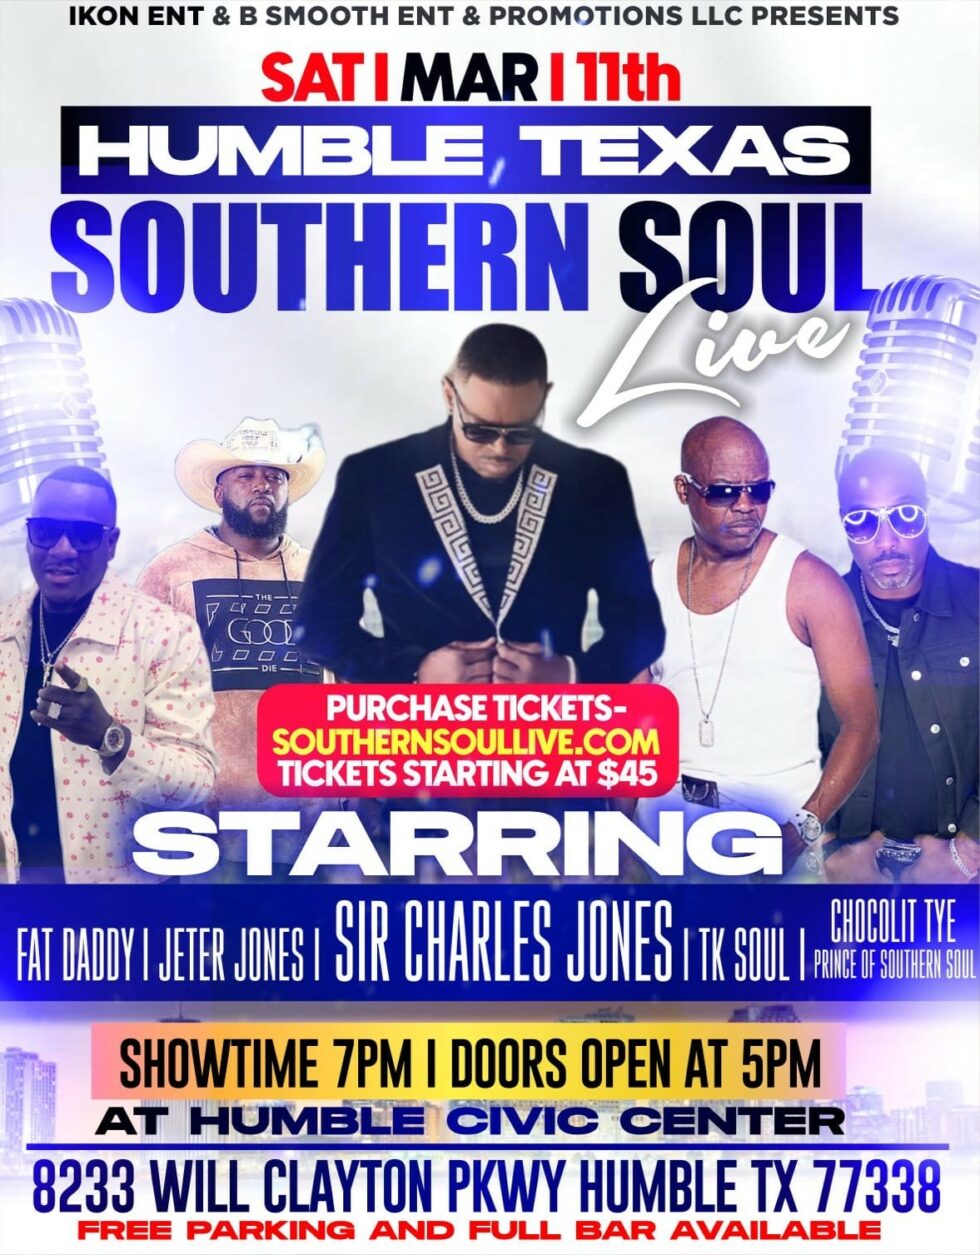 Humble Texas Southern Soul Live Concert Humble Civic Center & Arena